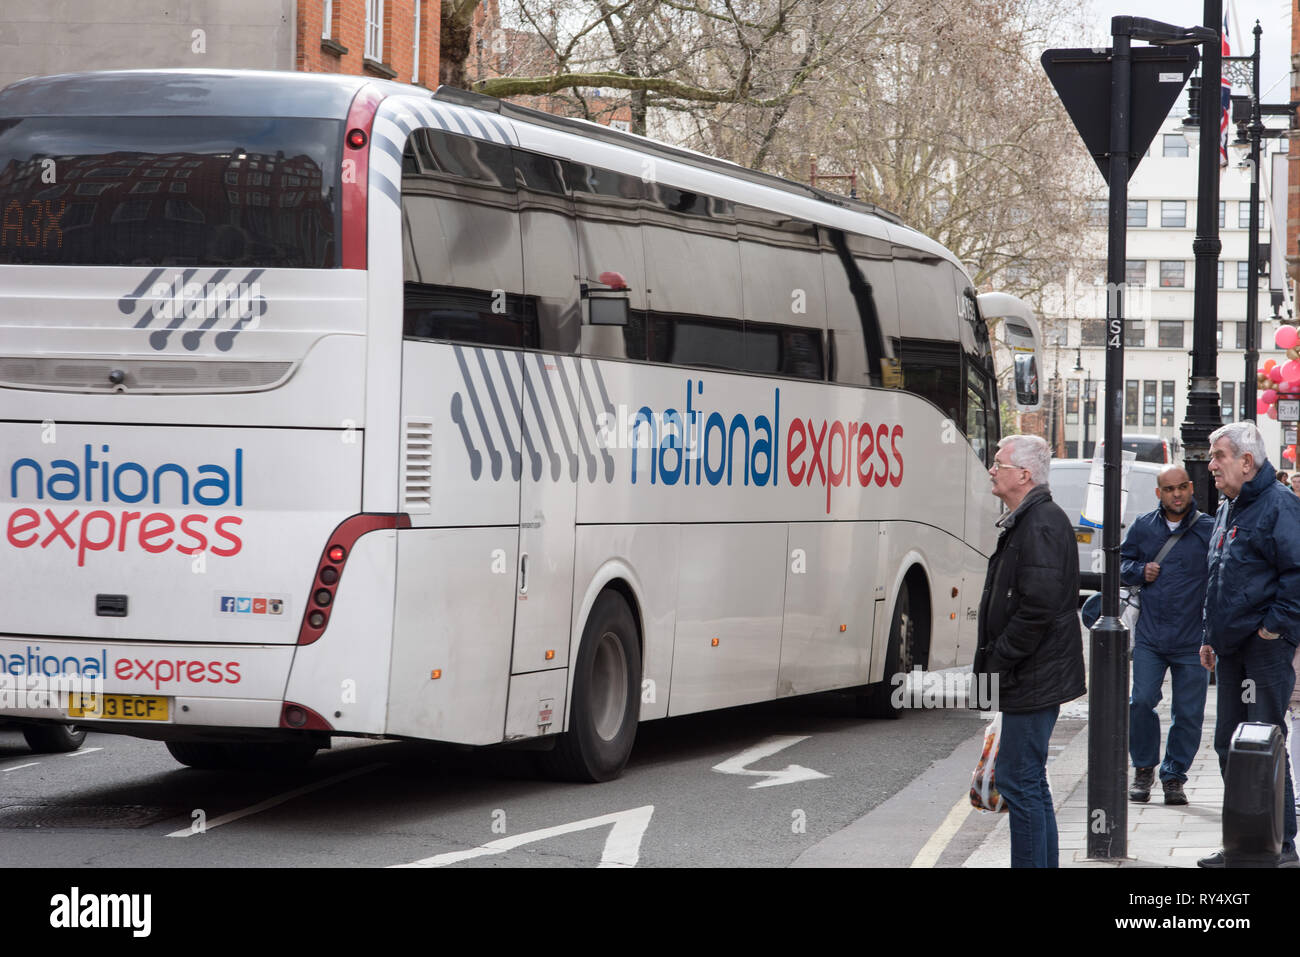 National express bus seen in London Victoria coach station Stock Photo -  Alamy